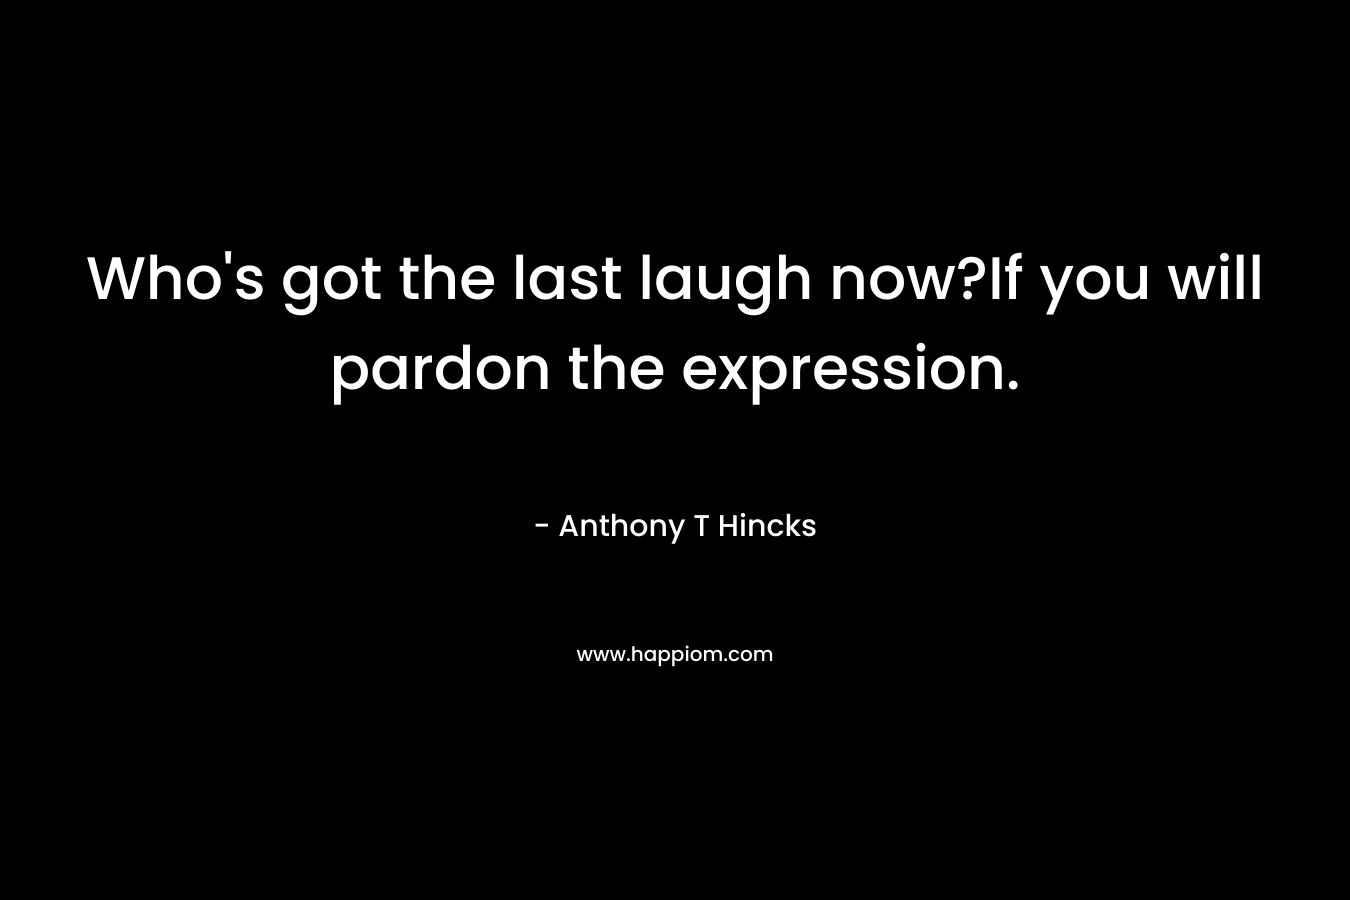 Who’s got the last laugh now?If you will pardon the expression. – Anthony T Hincks